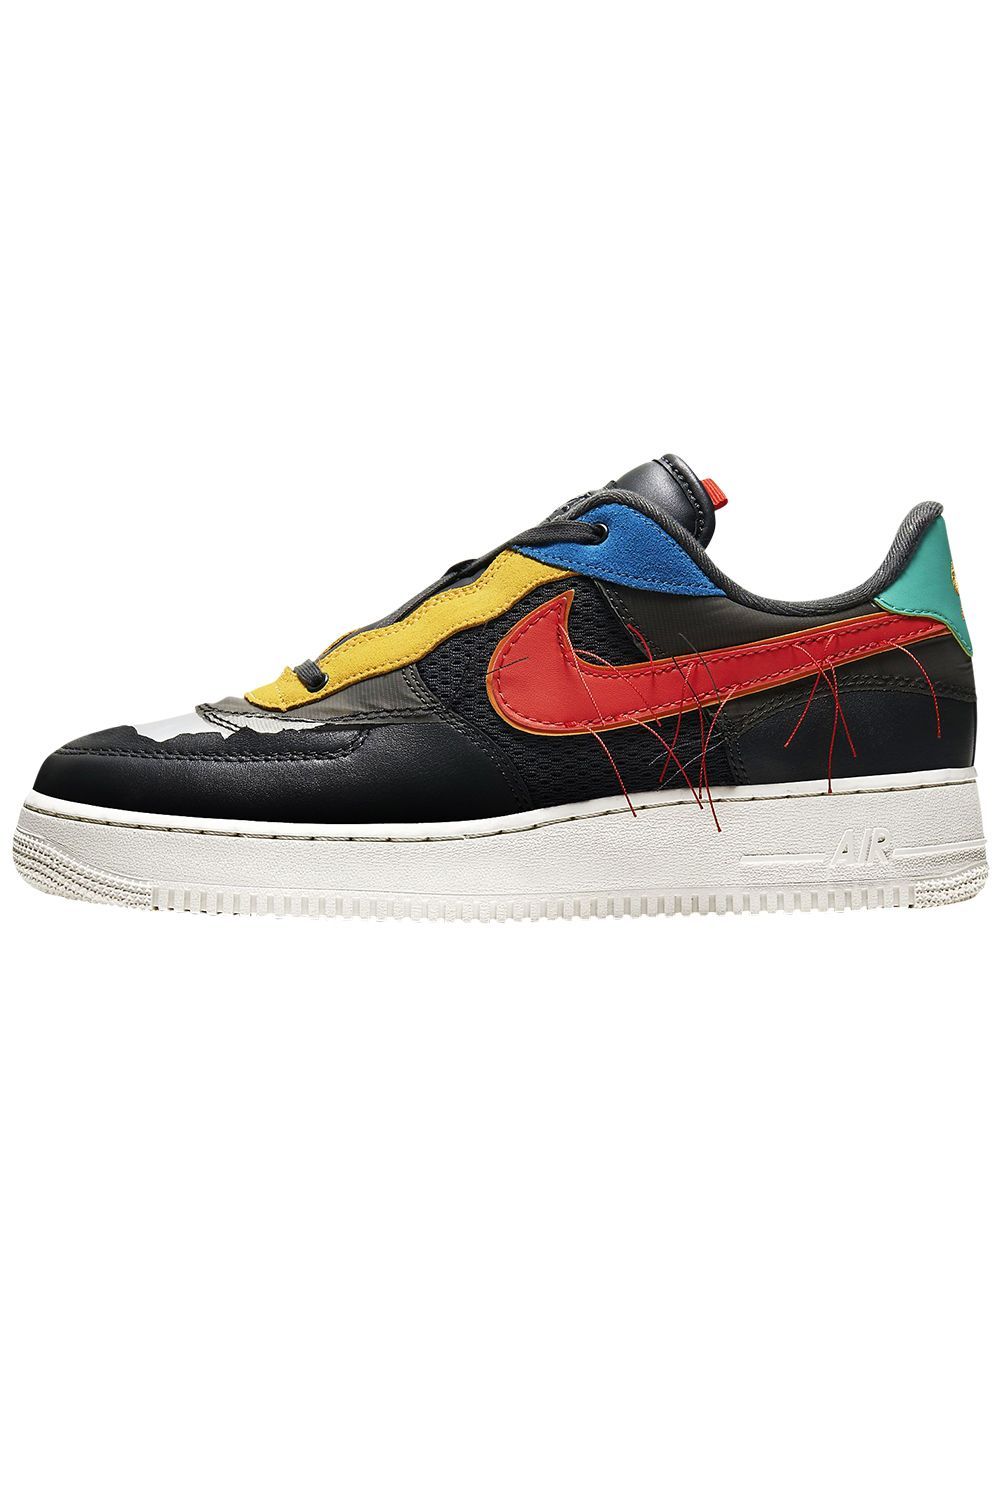 Air Force 1 Low Black History Month